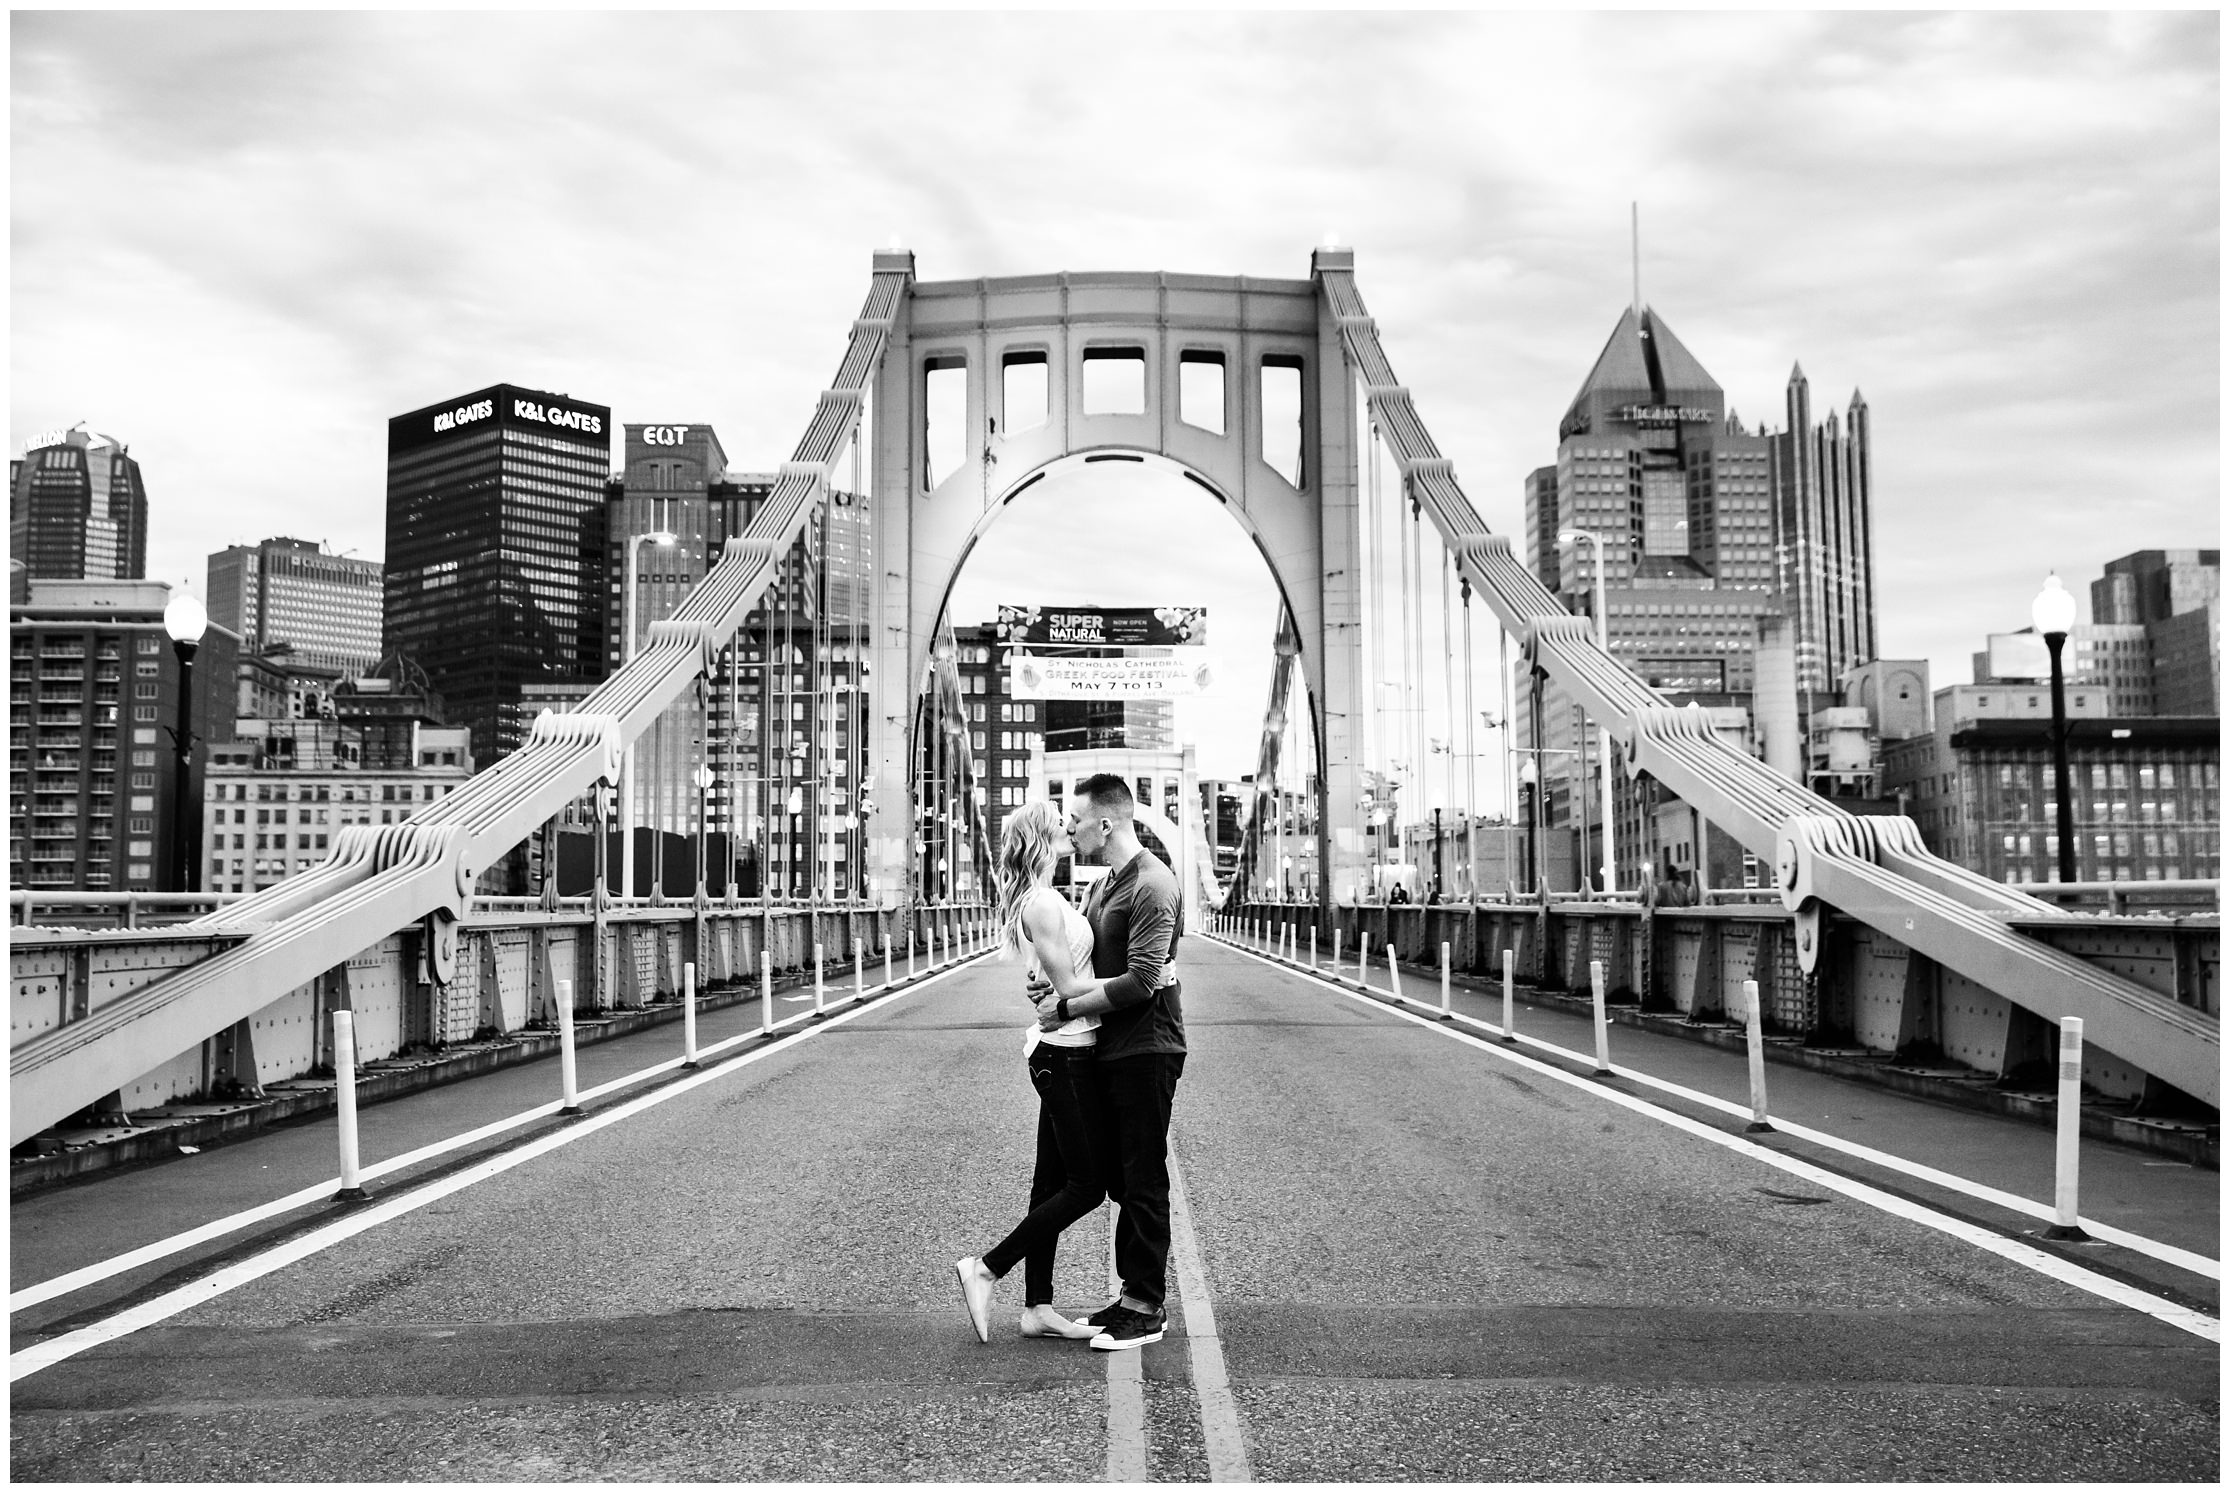 black and white engagement photography, clemente bridge pittsburgh, city engagement, city engagement photography, yellow bridge pittsburgh, yellow bridge photo shoot pittsburgh, clemente bridge engagement, fun pittsburgh engagement photography, romantic pittsburgh engagement photography, pittsburgh engagement photographer, pittsburgh engagement photography, pittsburgh engagement, pittsburgh wedding photographer, pittsburgh wedding photography, pittsburgh wedding, pittsburgh north shore, pittsburgh skyline, pittsburgh couple, engagement photo, engagement photography,